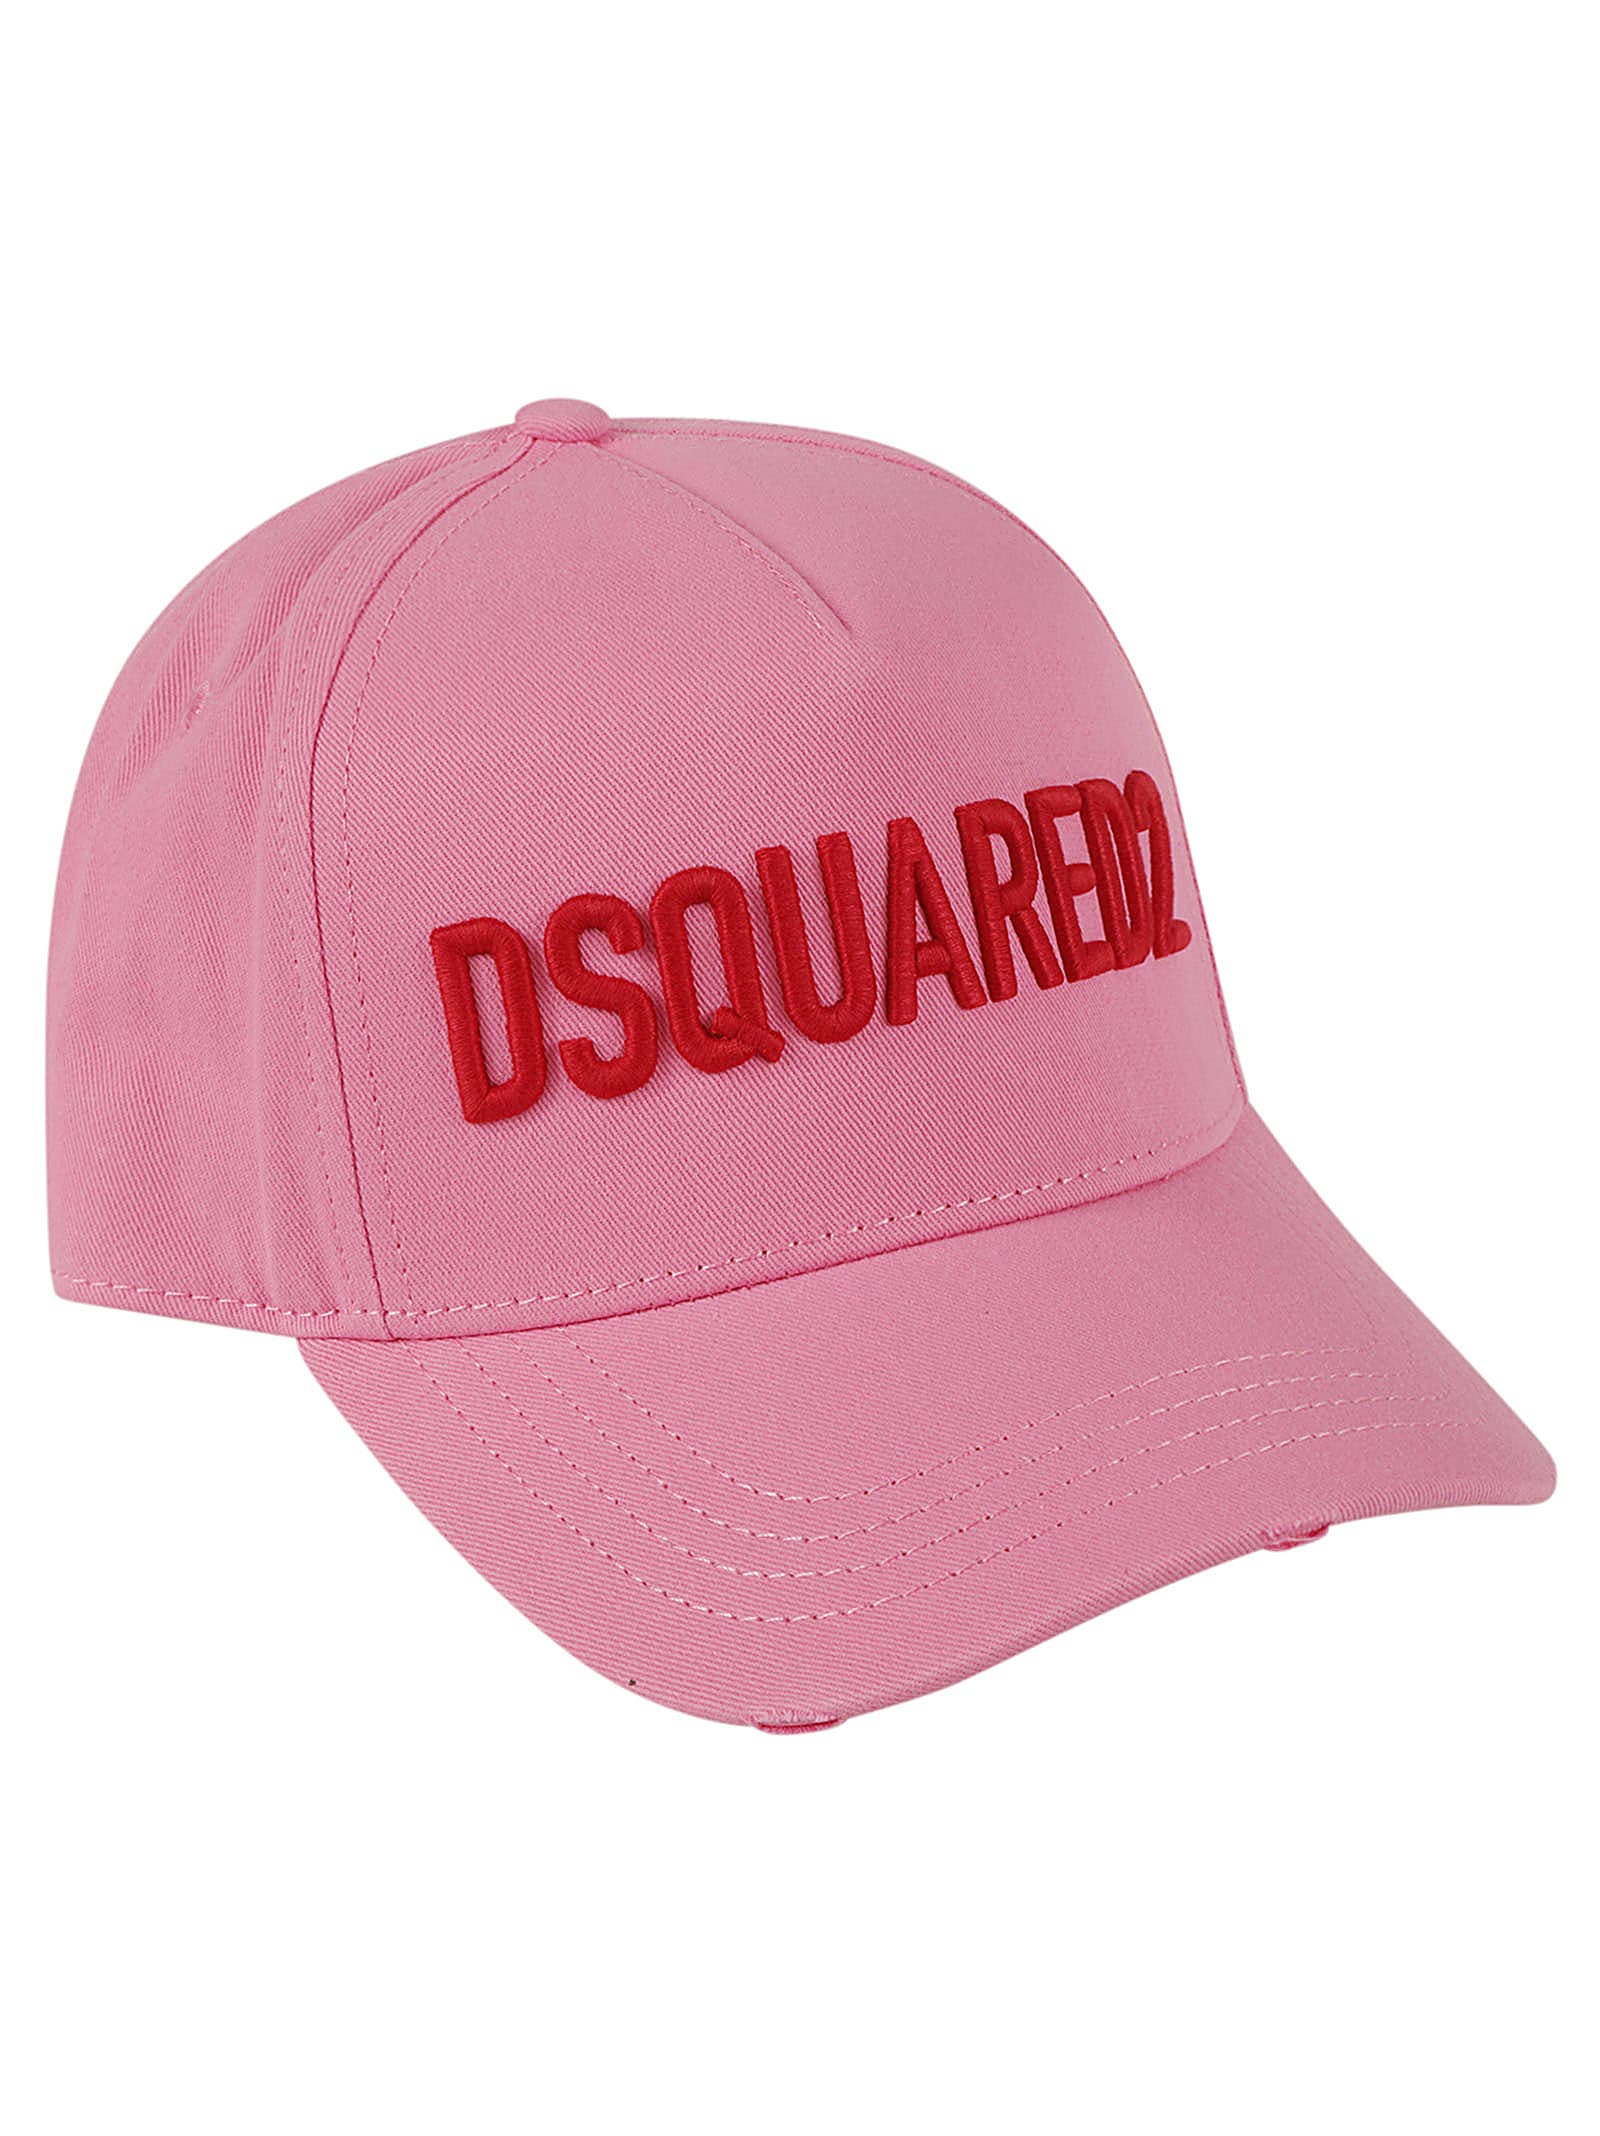 Dsquared2 Wm Baseball Cap In Pink/red